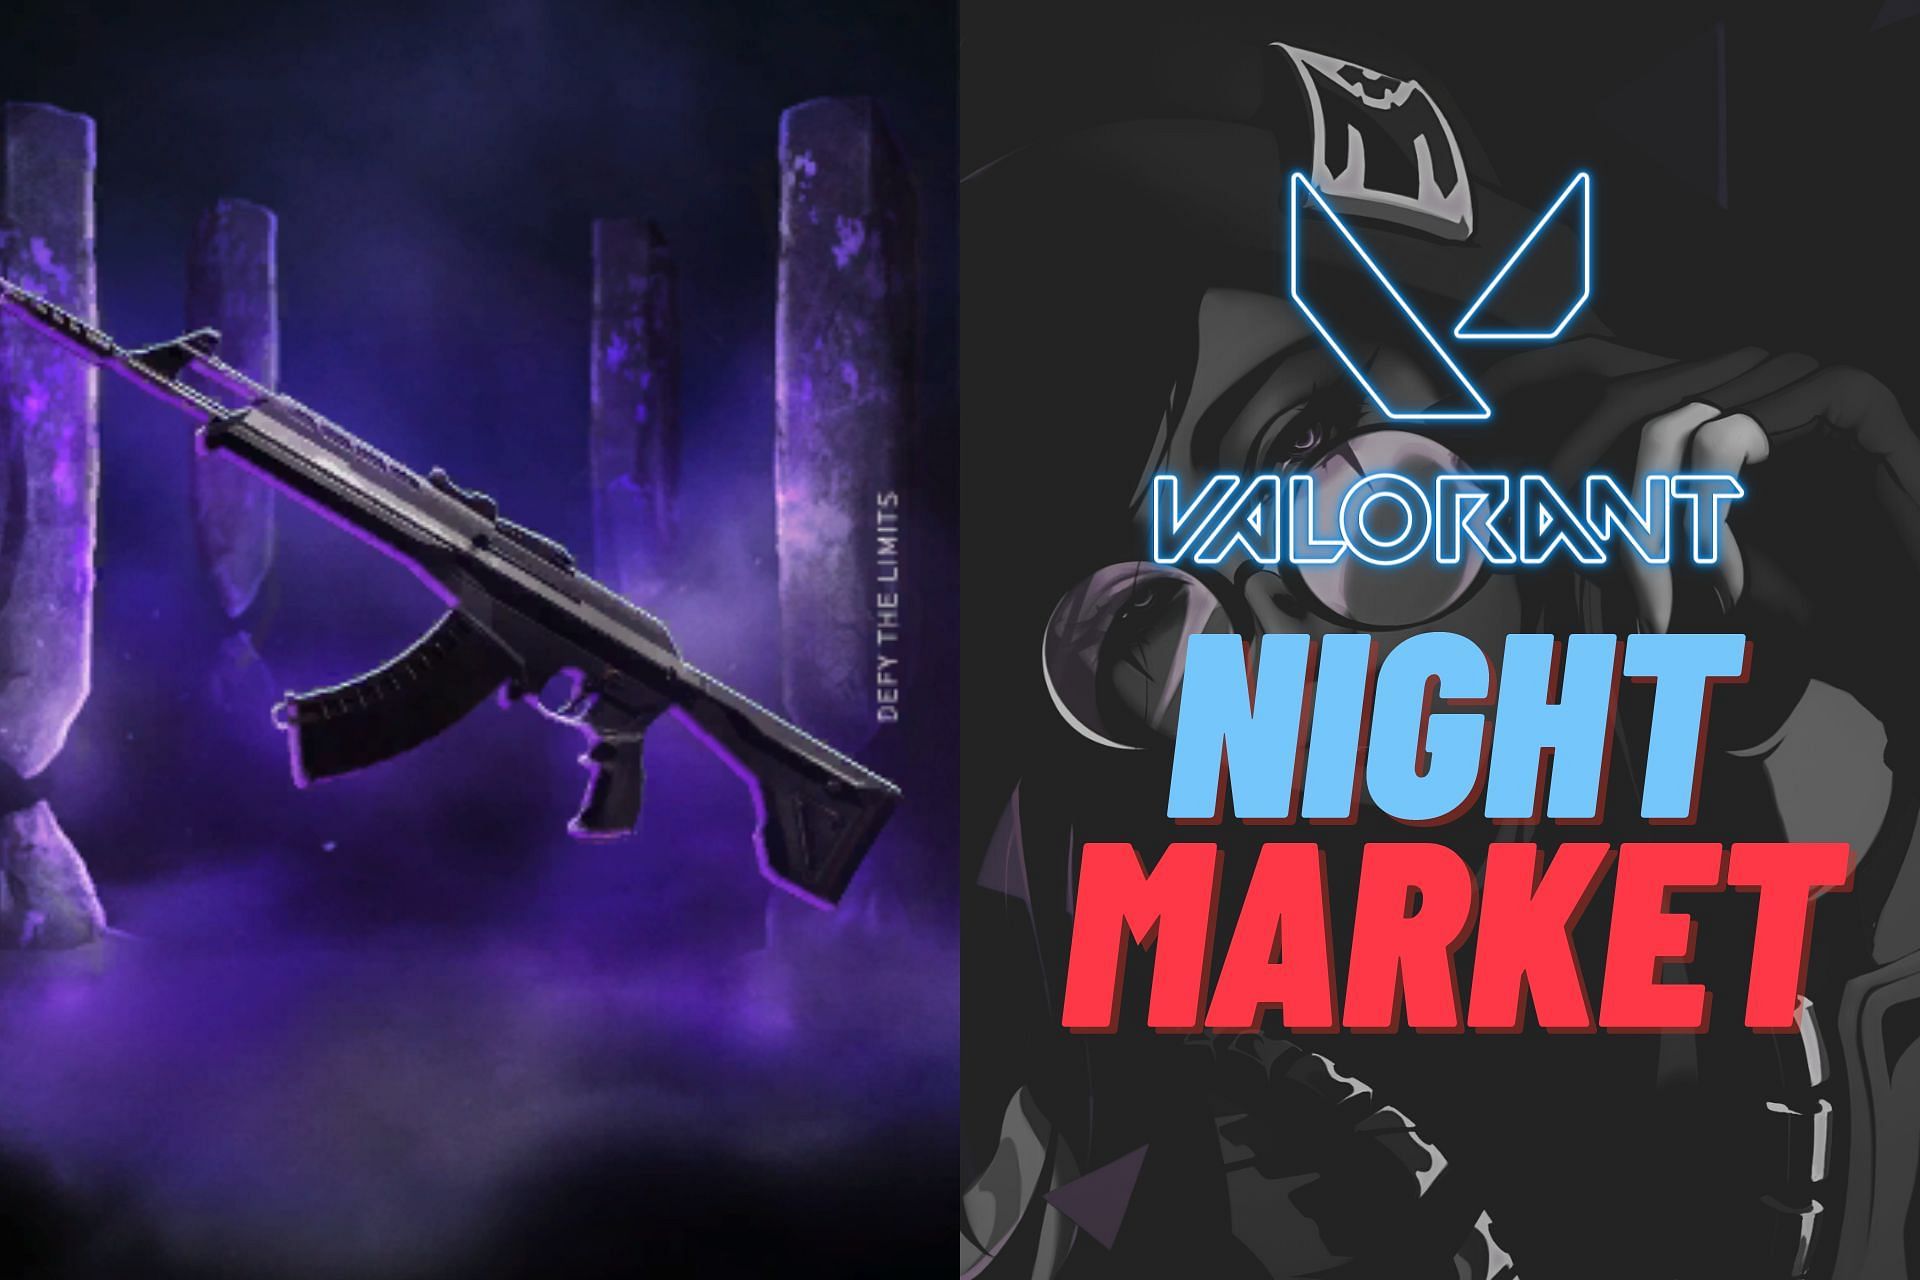 Everything to know about the Valorant Episode 5 Act 1 Night Market (Image via Sportskeeda)